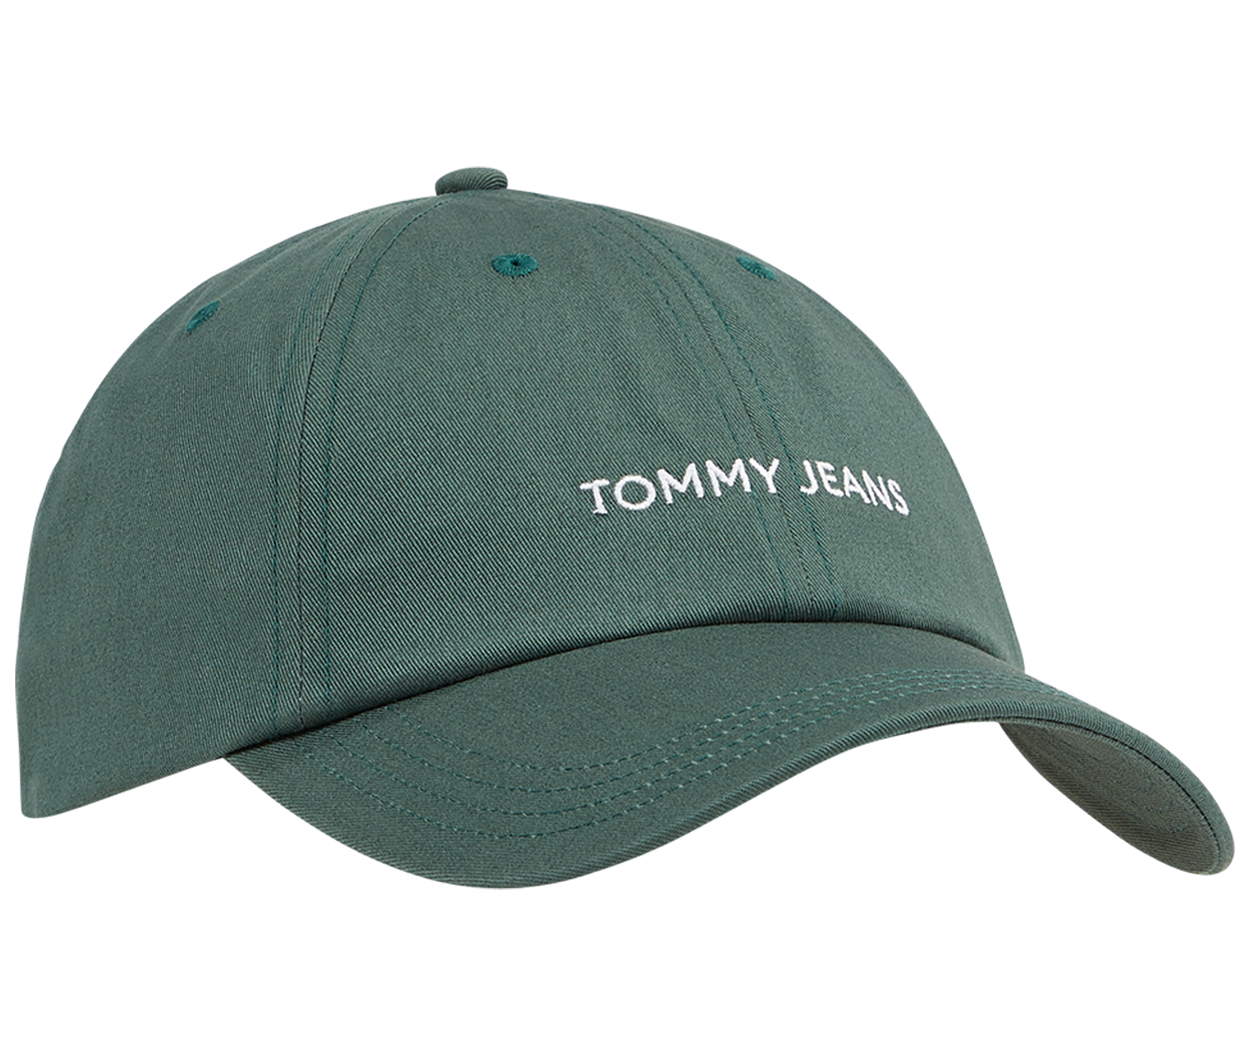 Casquette Tommy Jeans coton sapin